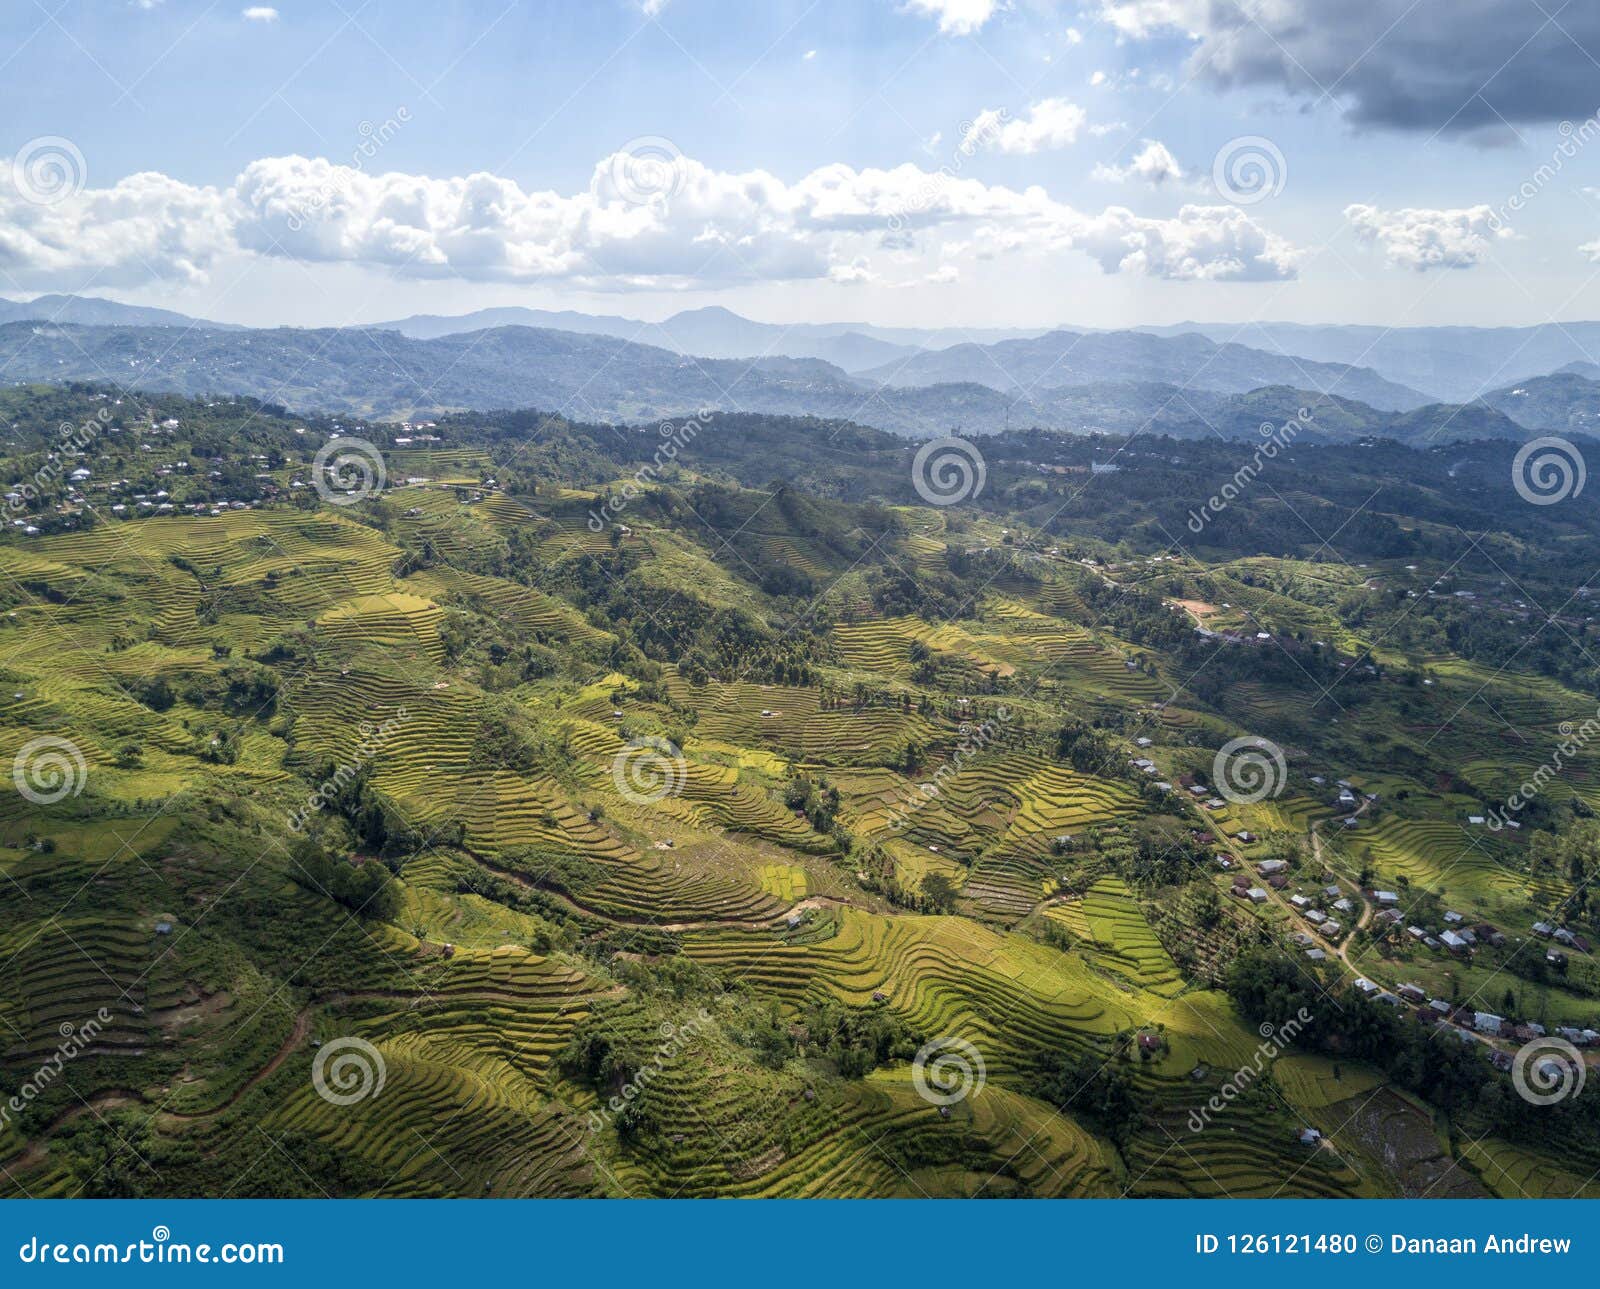 unreal aerial view of ruteng, flores